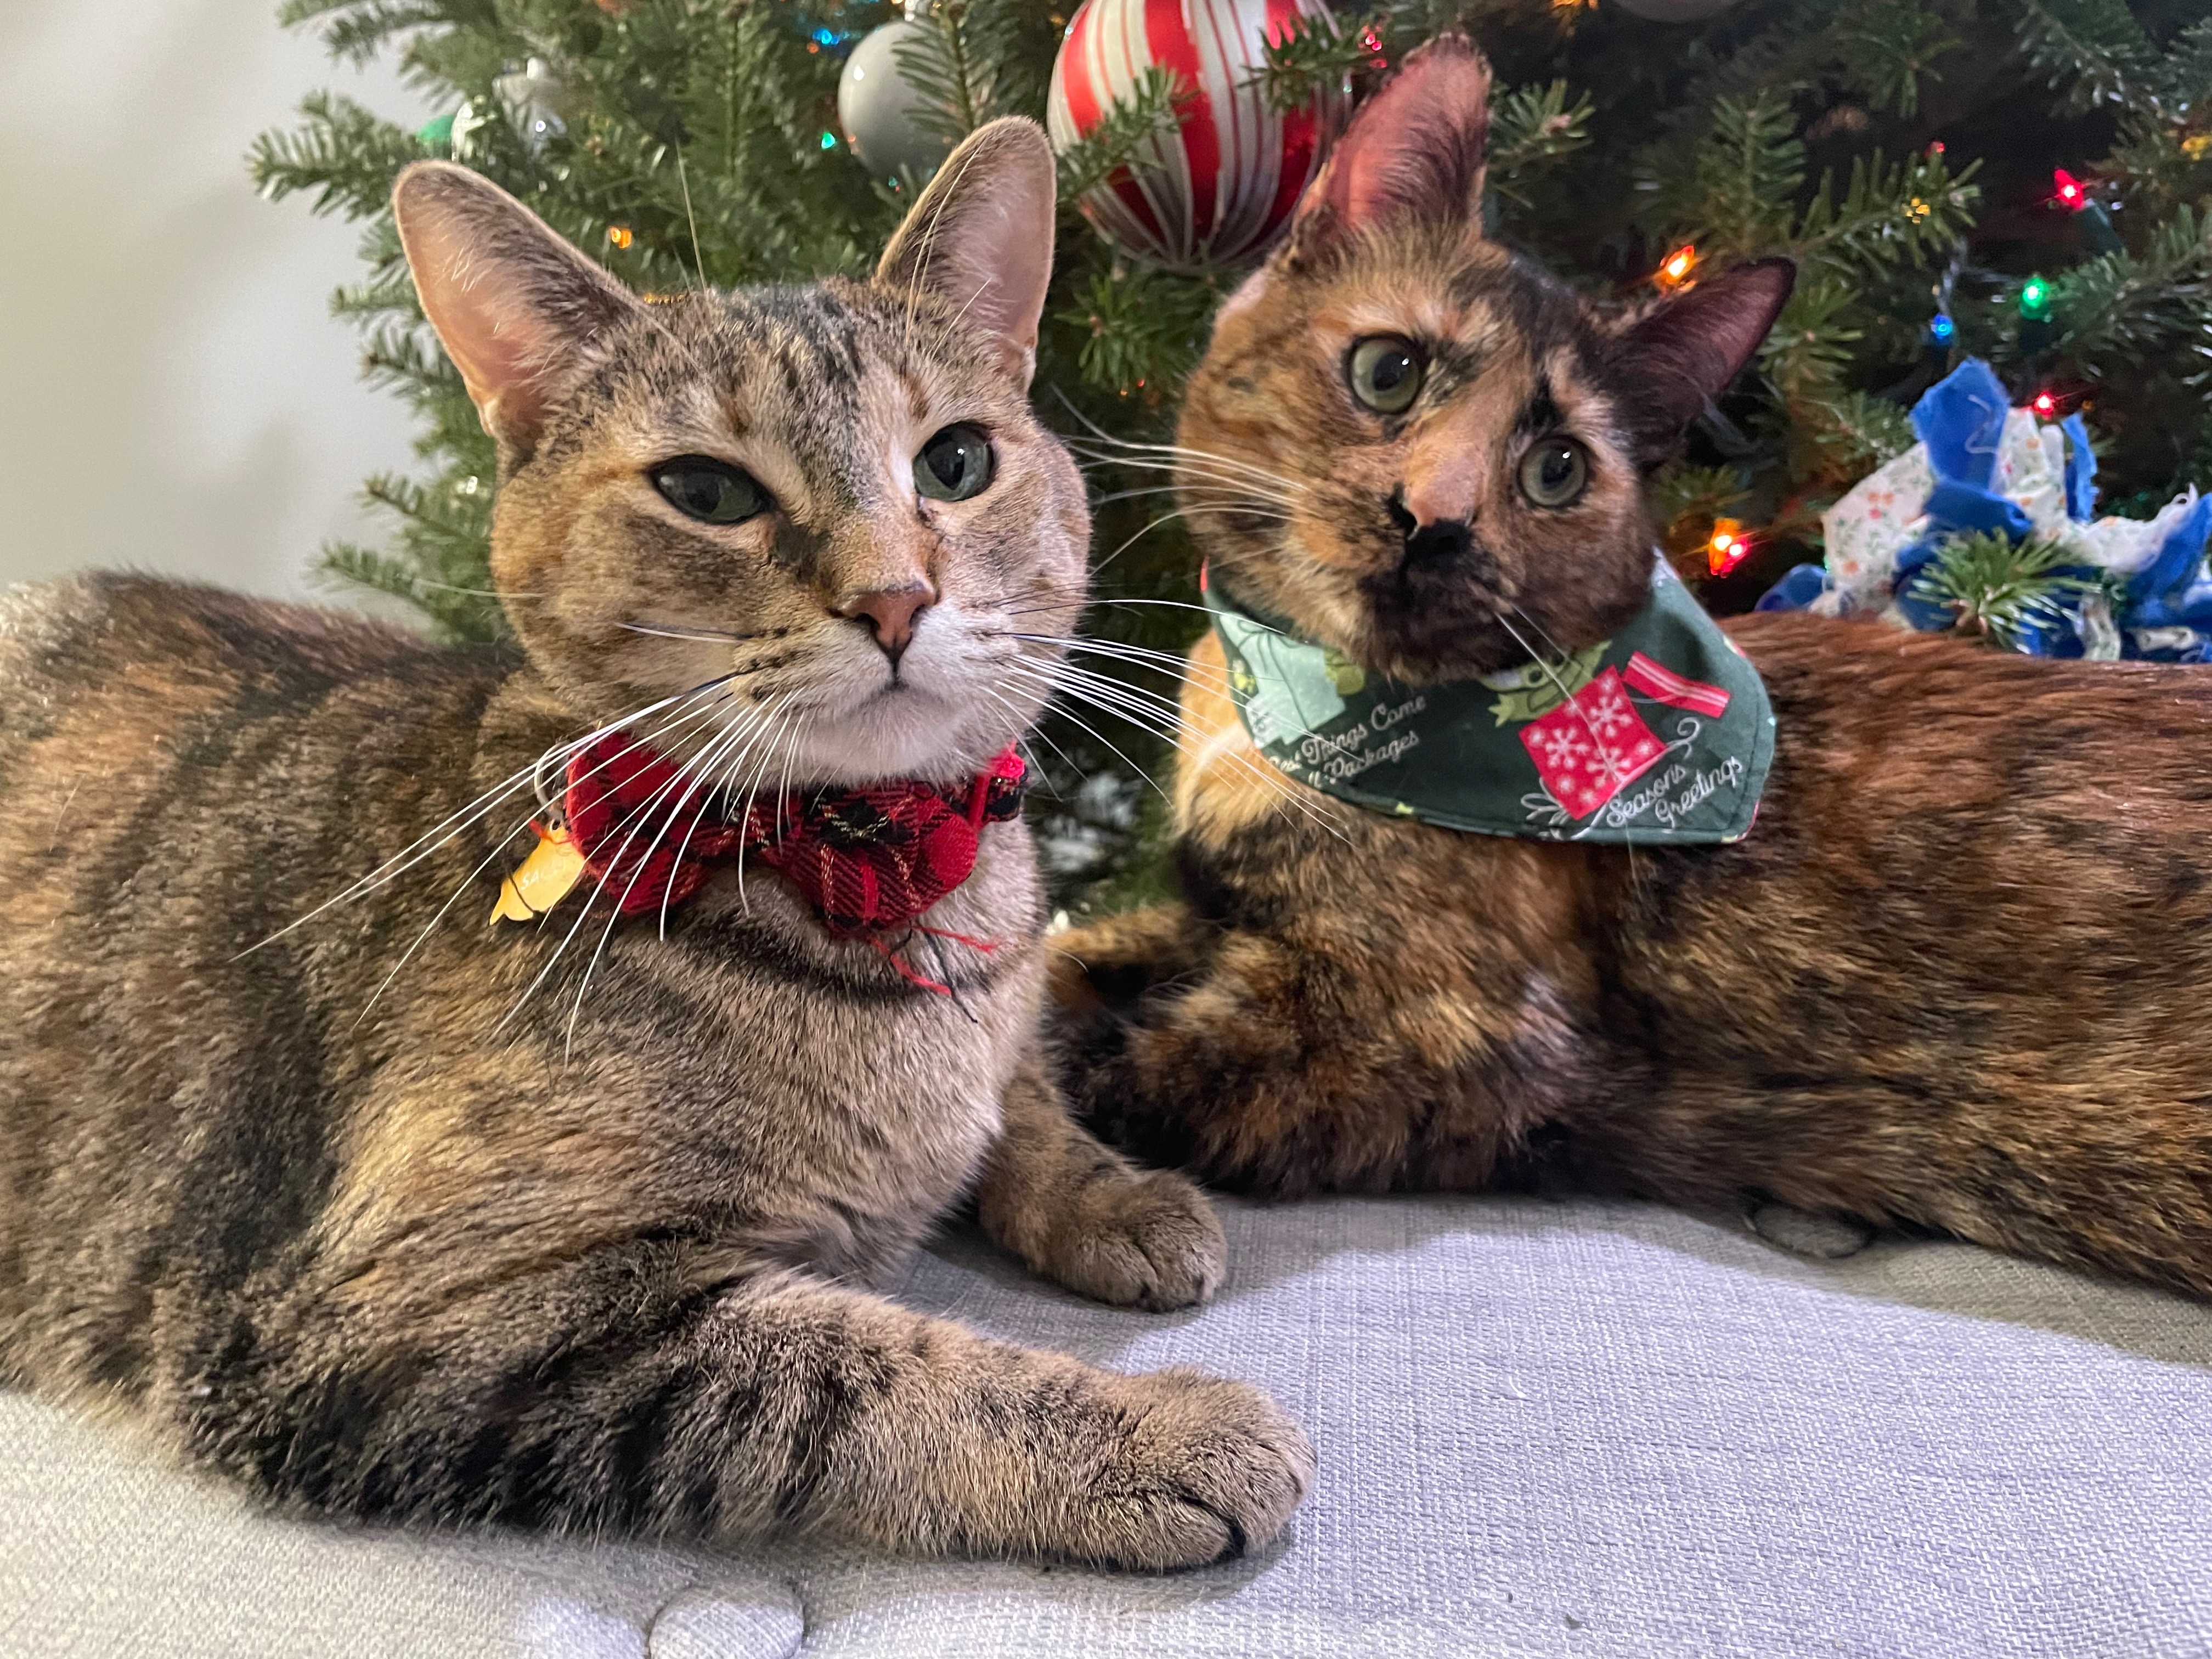 A photo of Sarah's 2 cats laying down on an ottoman with a christmas tree behind them. The cat on the left is a striped tabby and is wearing a red plad collar with a bow and a fish nametag. The cat on the right is a tortiseshell with lots of orange and brown fur and is wearing a green bandana with baby yoda jumping out of a christmas box.